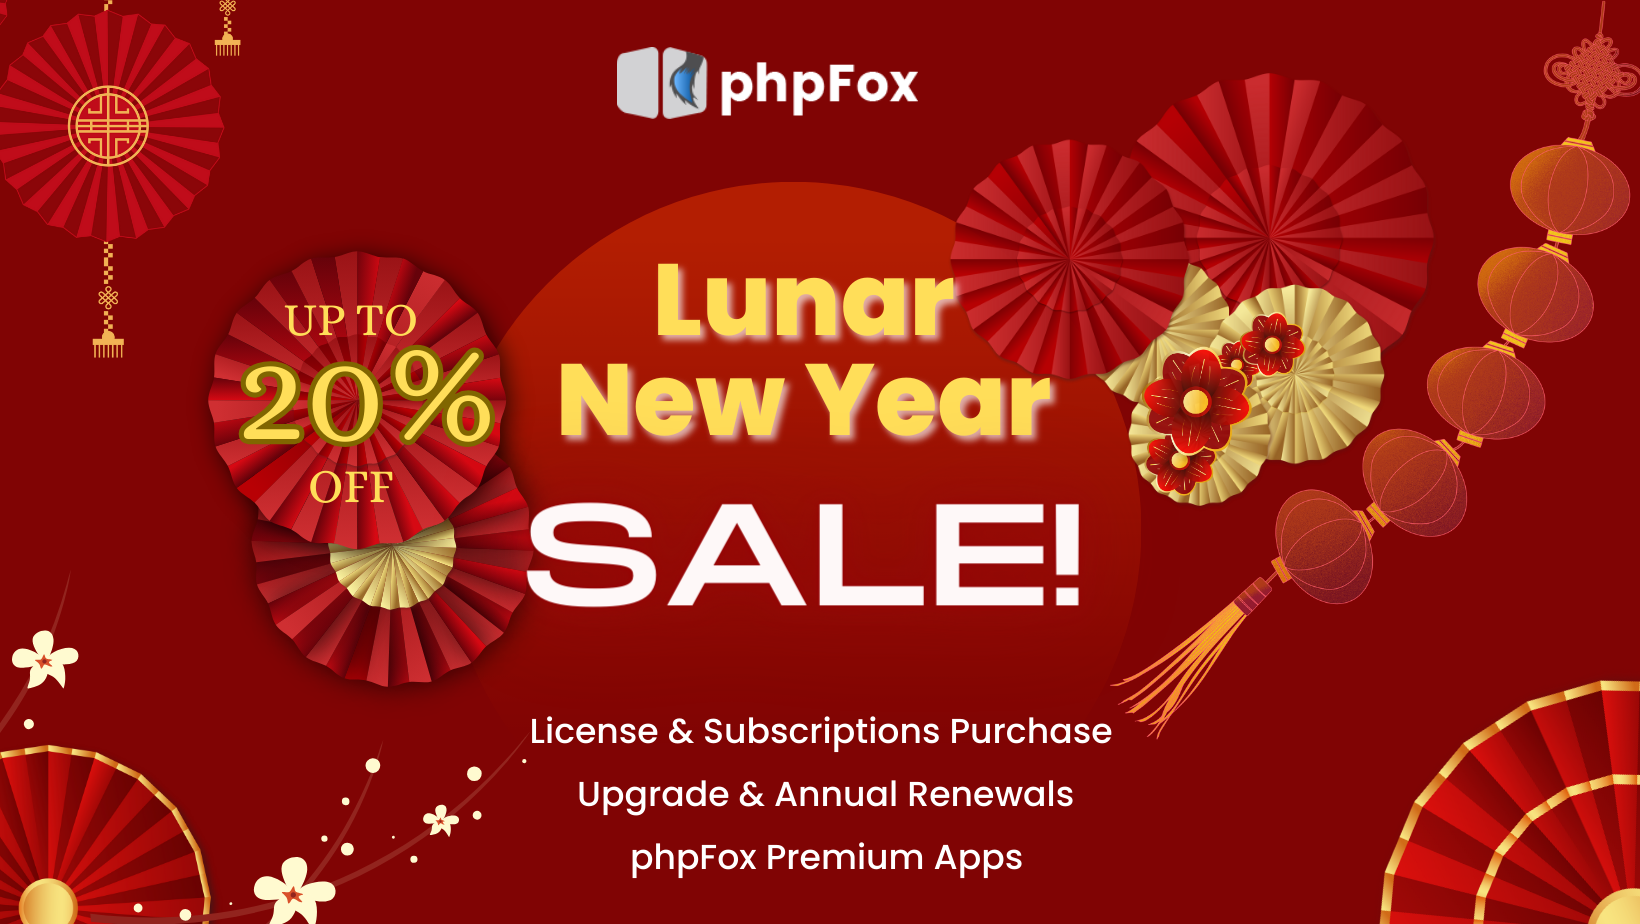 Celebrate Lunar New Year with phpFox’s Exclusive Discounts